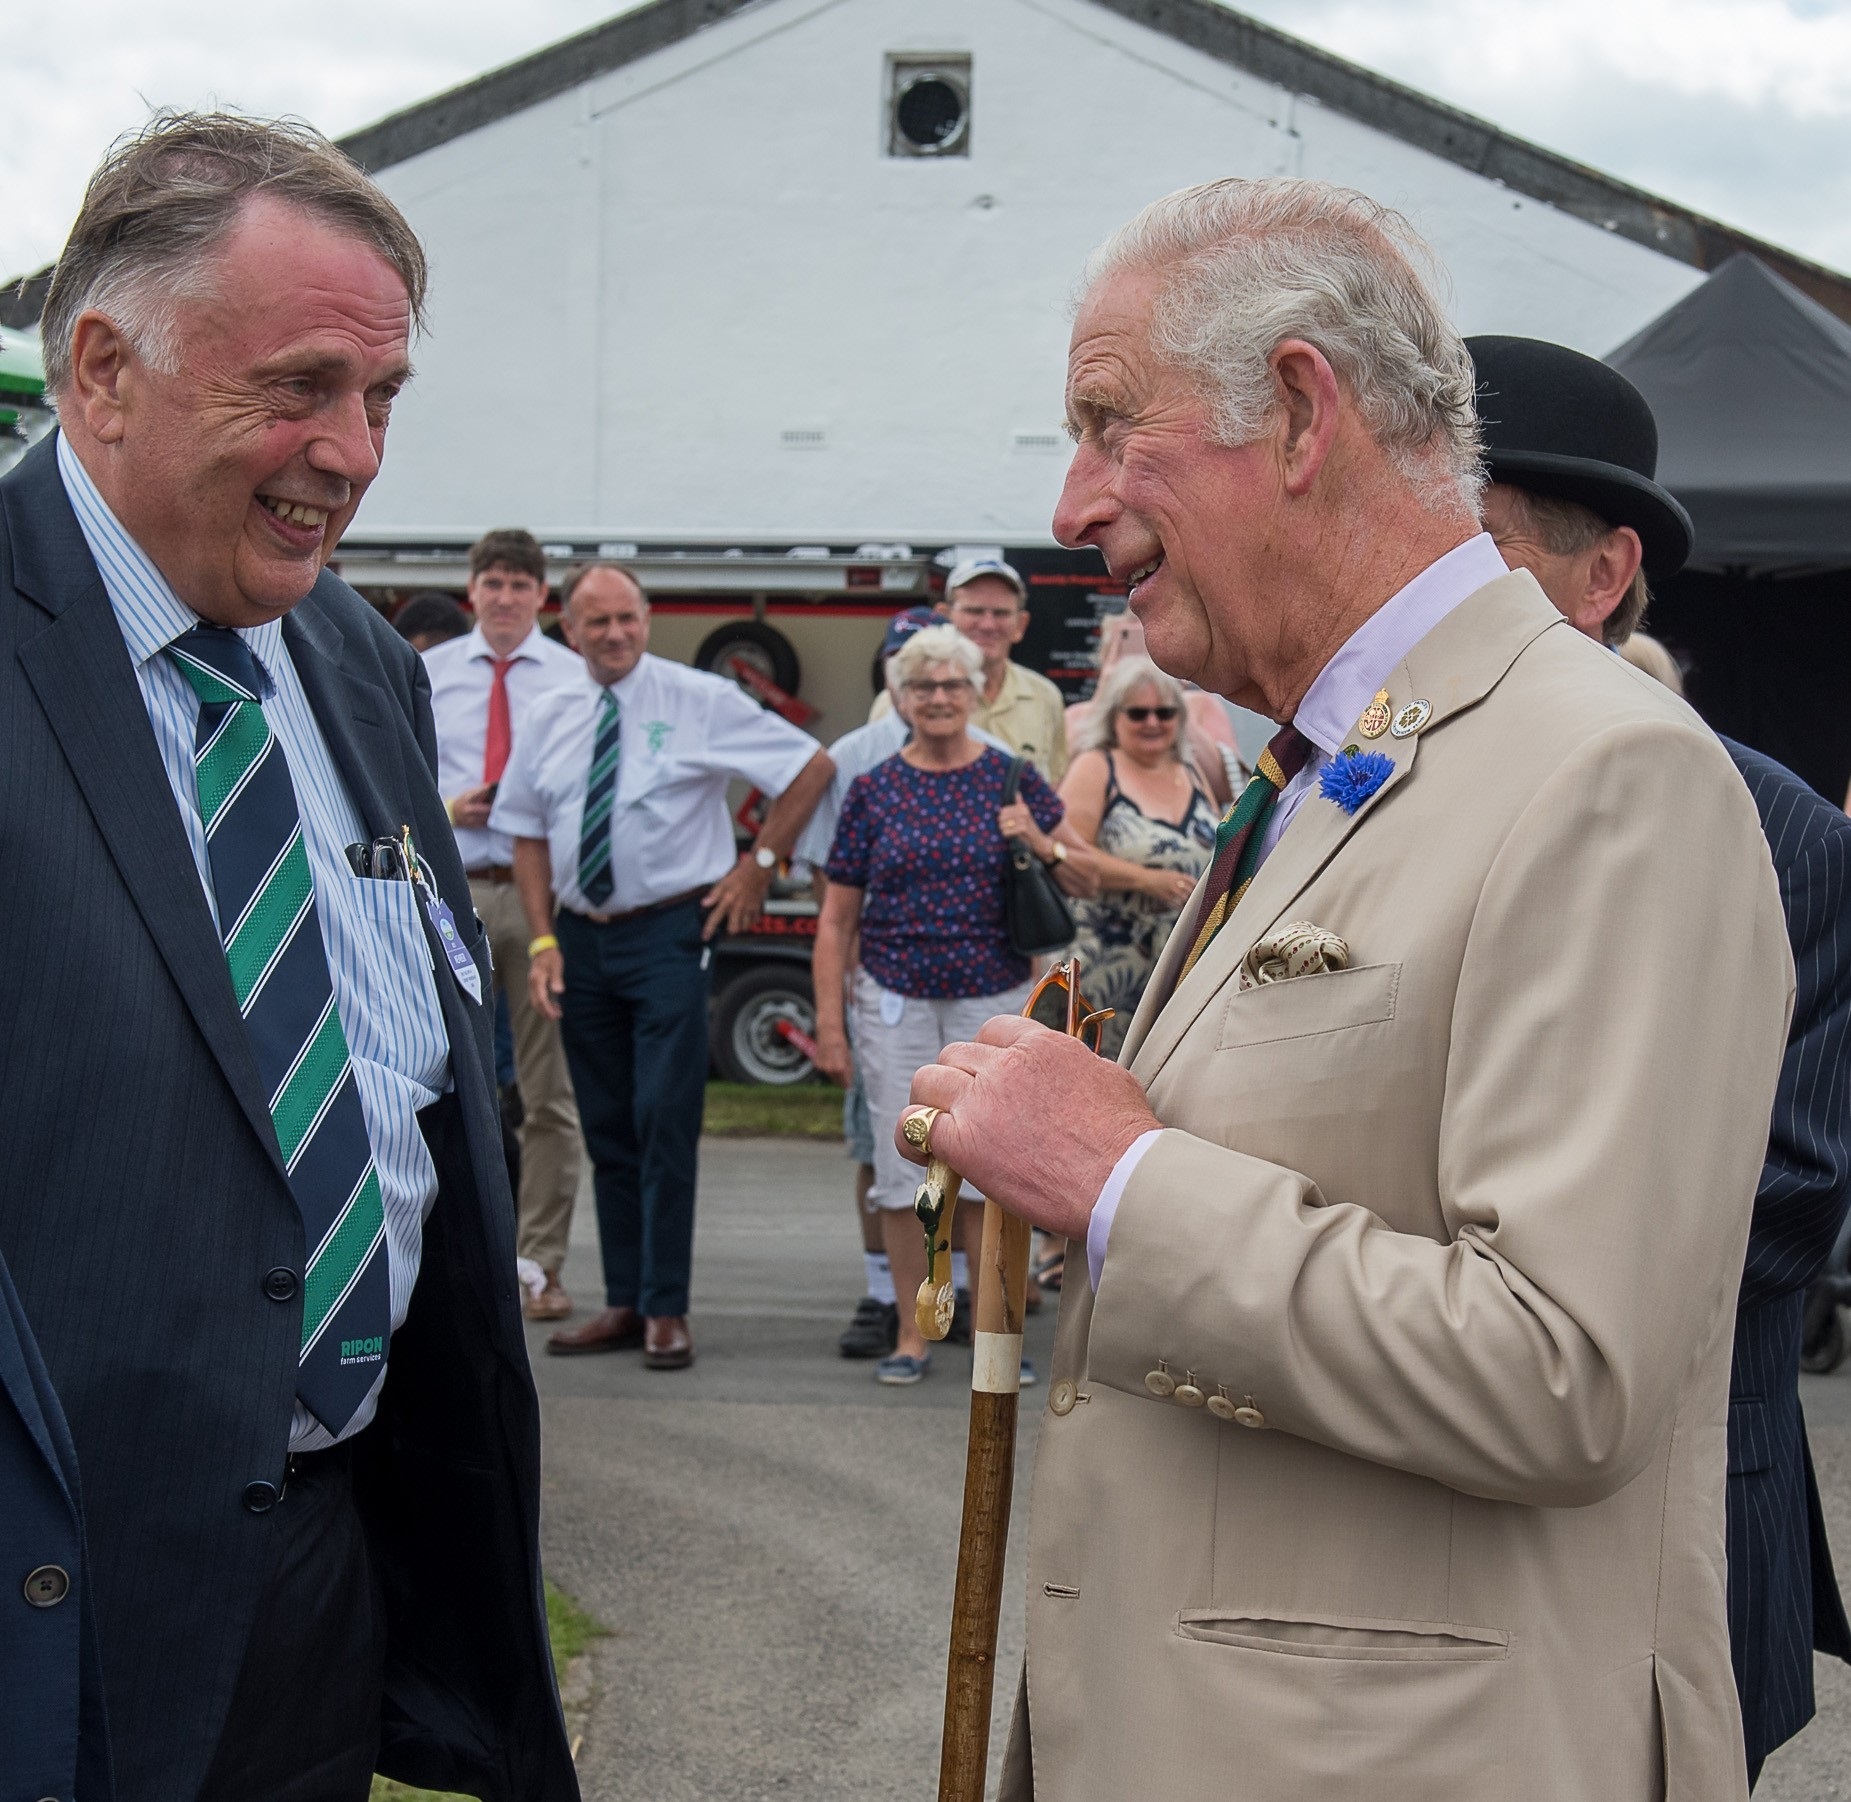 Geoff Brown of Ripon Farm Services with the then Prince Charles at the Great Yorkshire Show